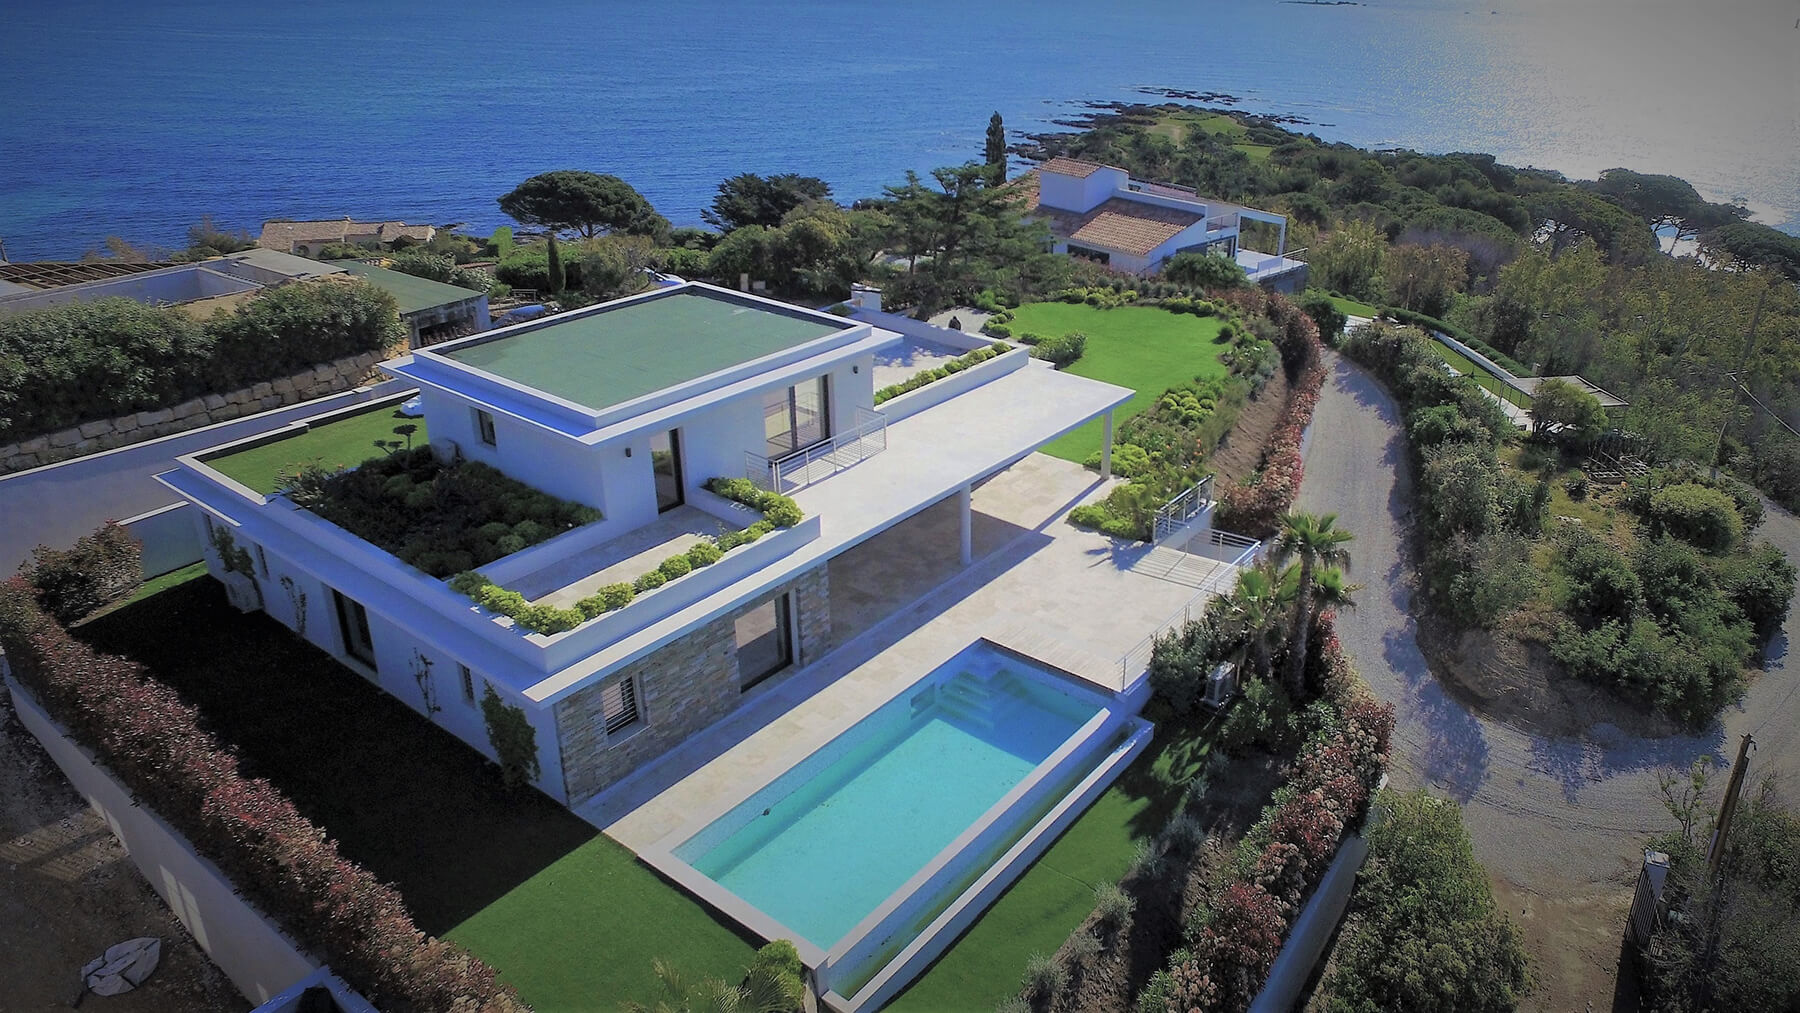 Luxury Villa Rentals in the South of France to create moments and unwind with your loved ones.